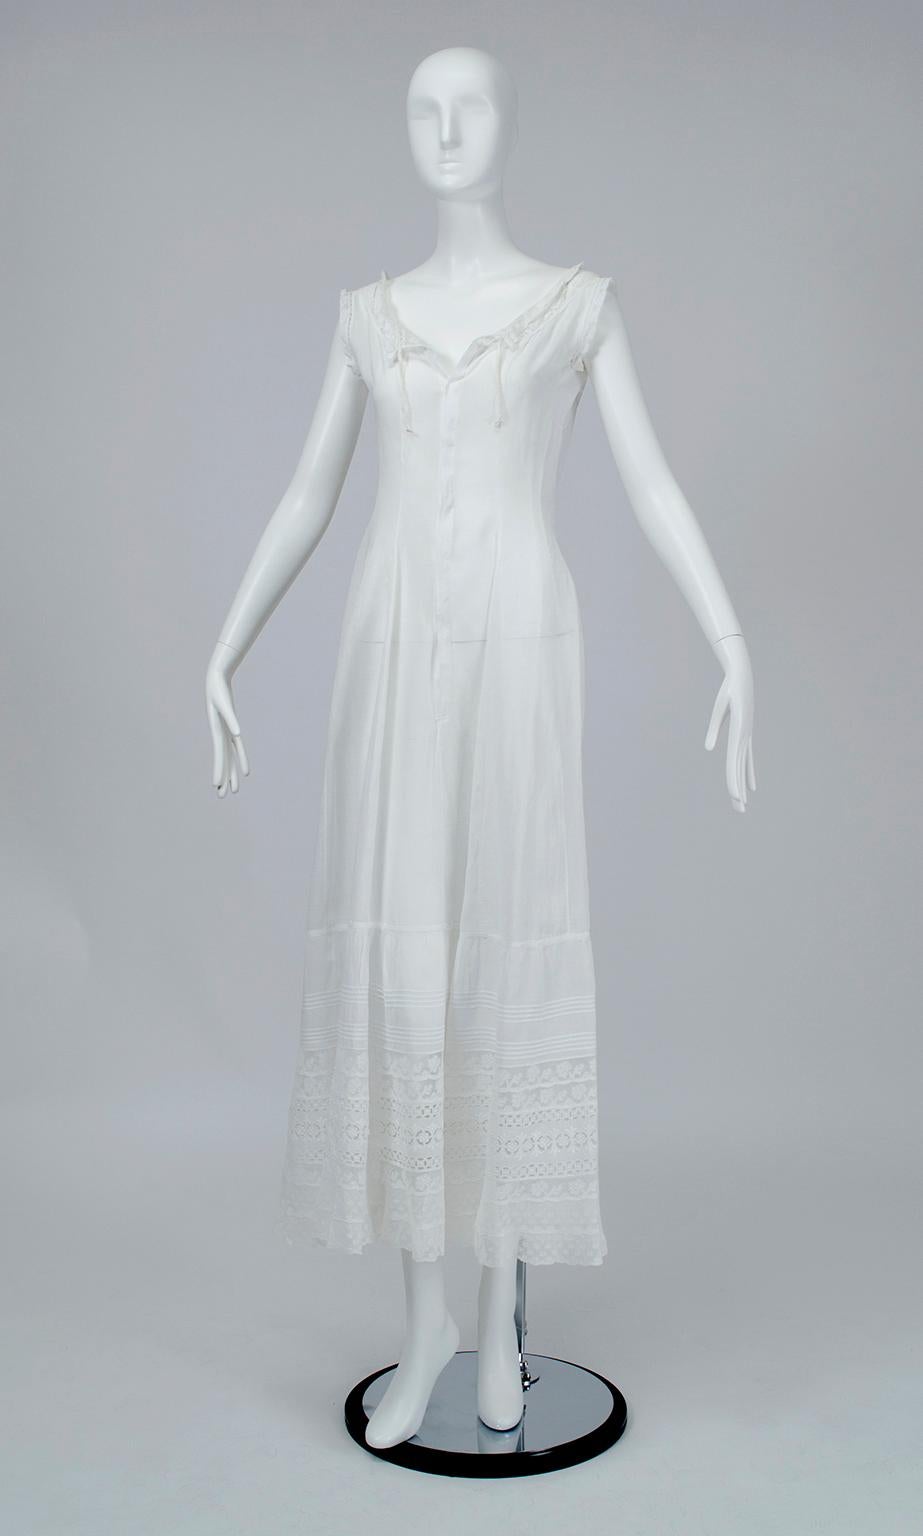 Though it looks and wears like a nightgown, this incredible garment was actually the Edwardian equivalent of a full slip and would have been worn beneath a corset, up to three additional petticoats and another dress. Its shapely princess seams,